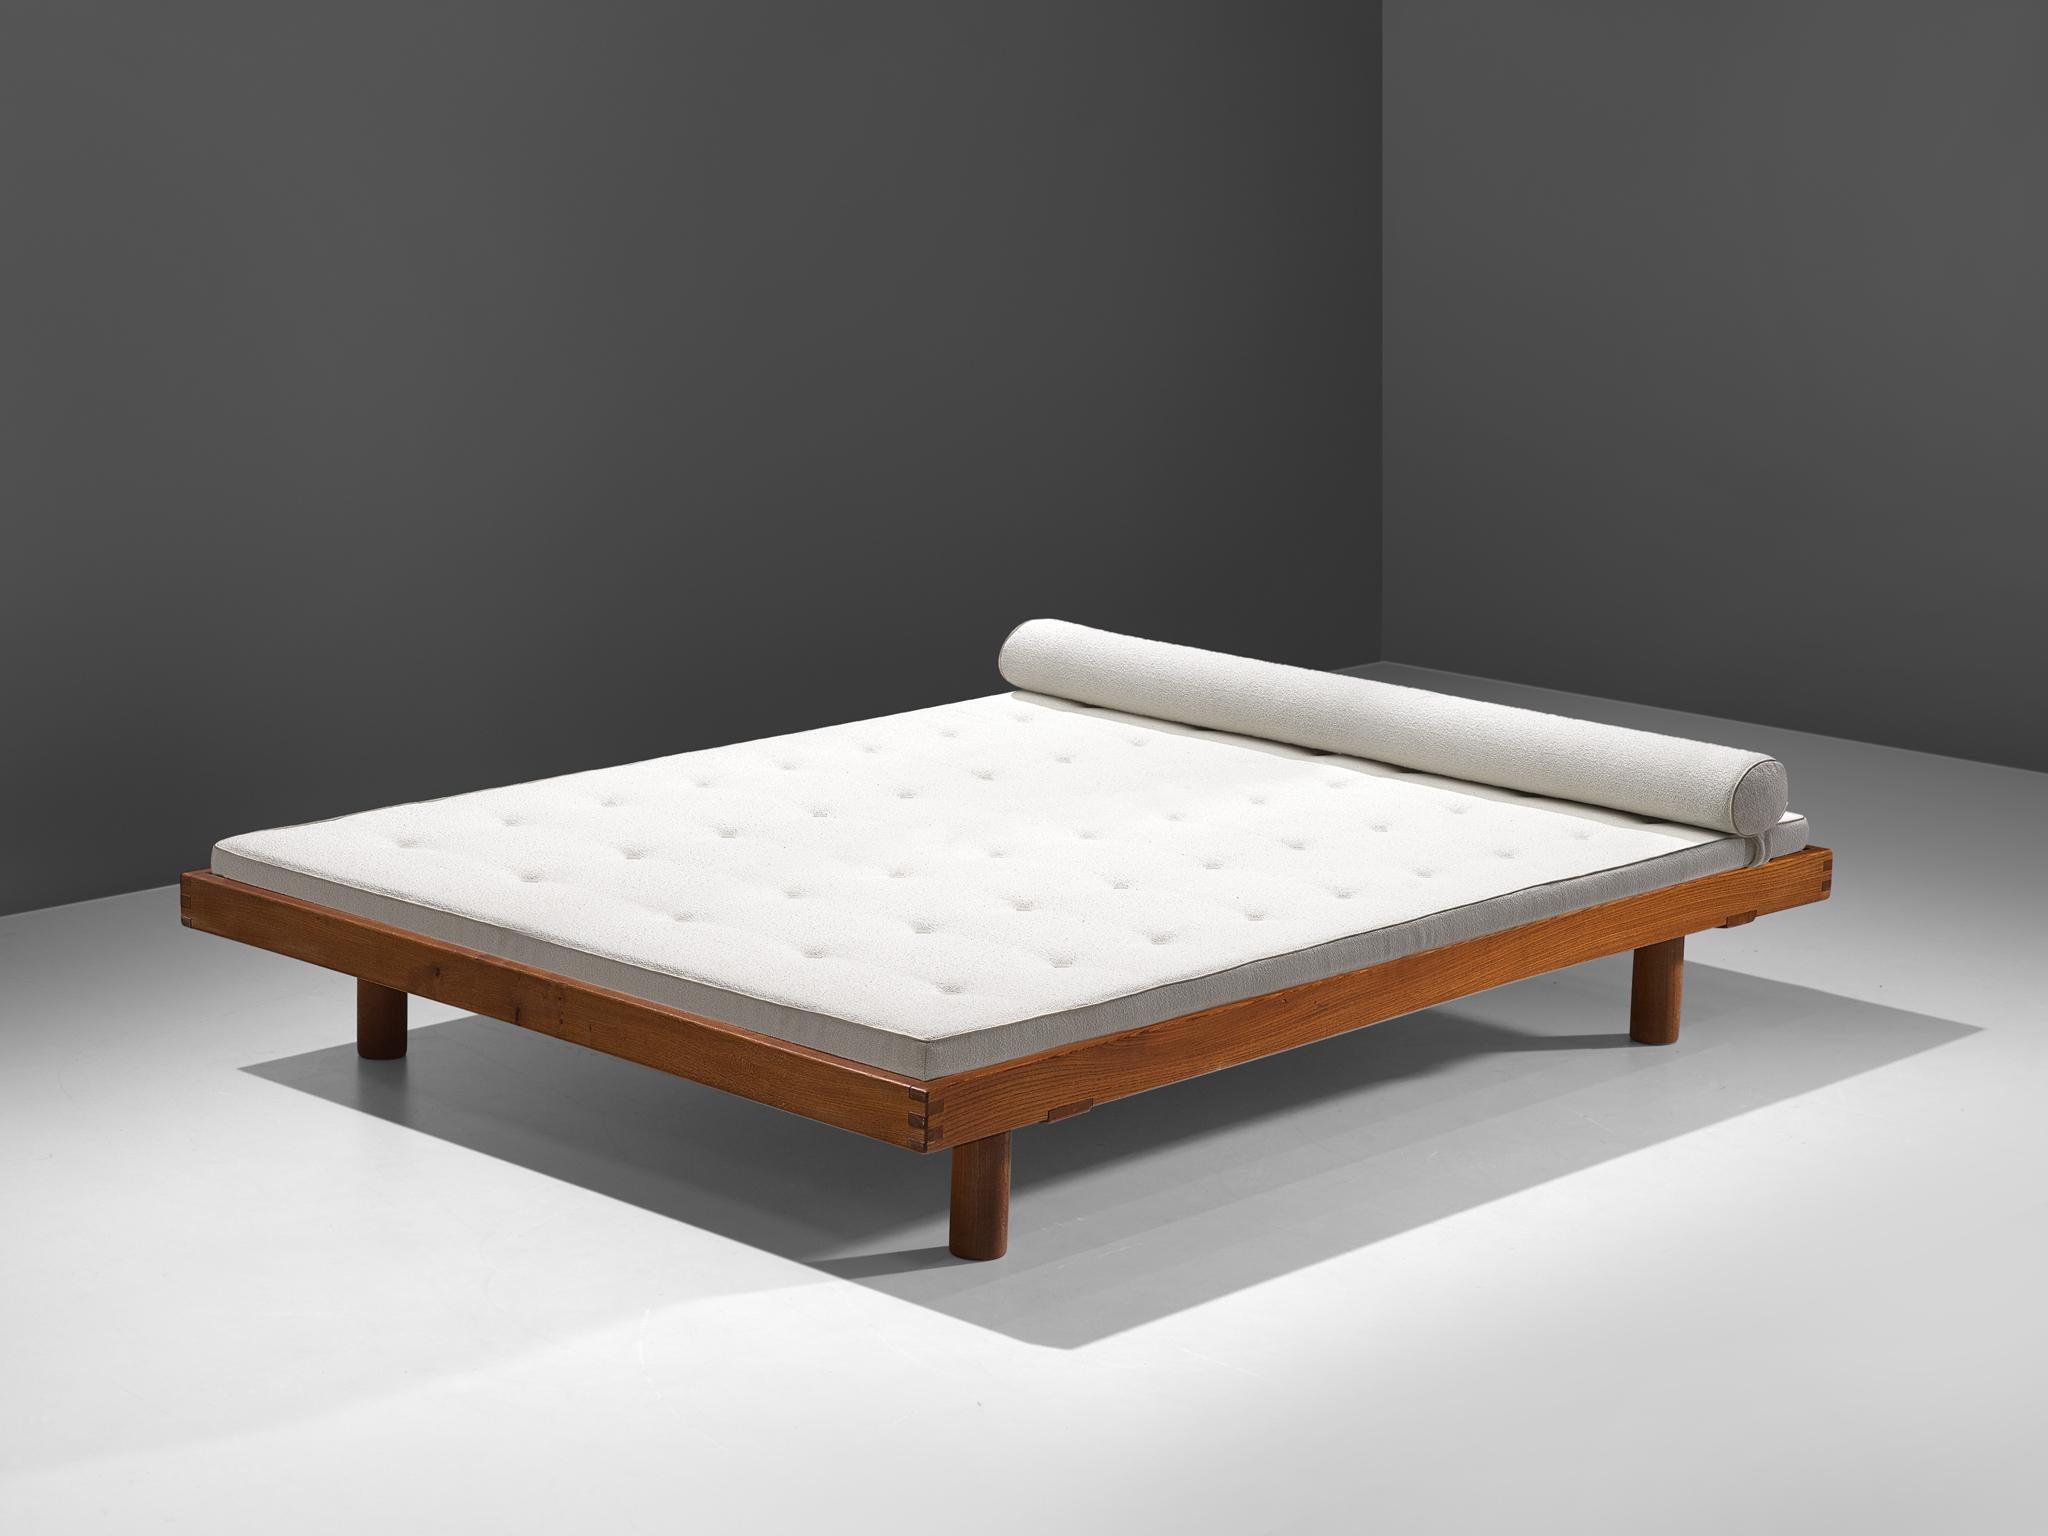 Pierre Chapo, “Godot” L01I daybed, elm and fabric, France, 1965

The L01 bed by Pierre Chapo is characterized for its taut, sober design with simple lines and the box joints at the corners of the frame. Chapo designed this daybed in 1959 for the